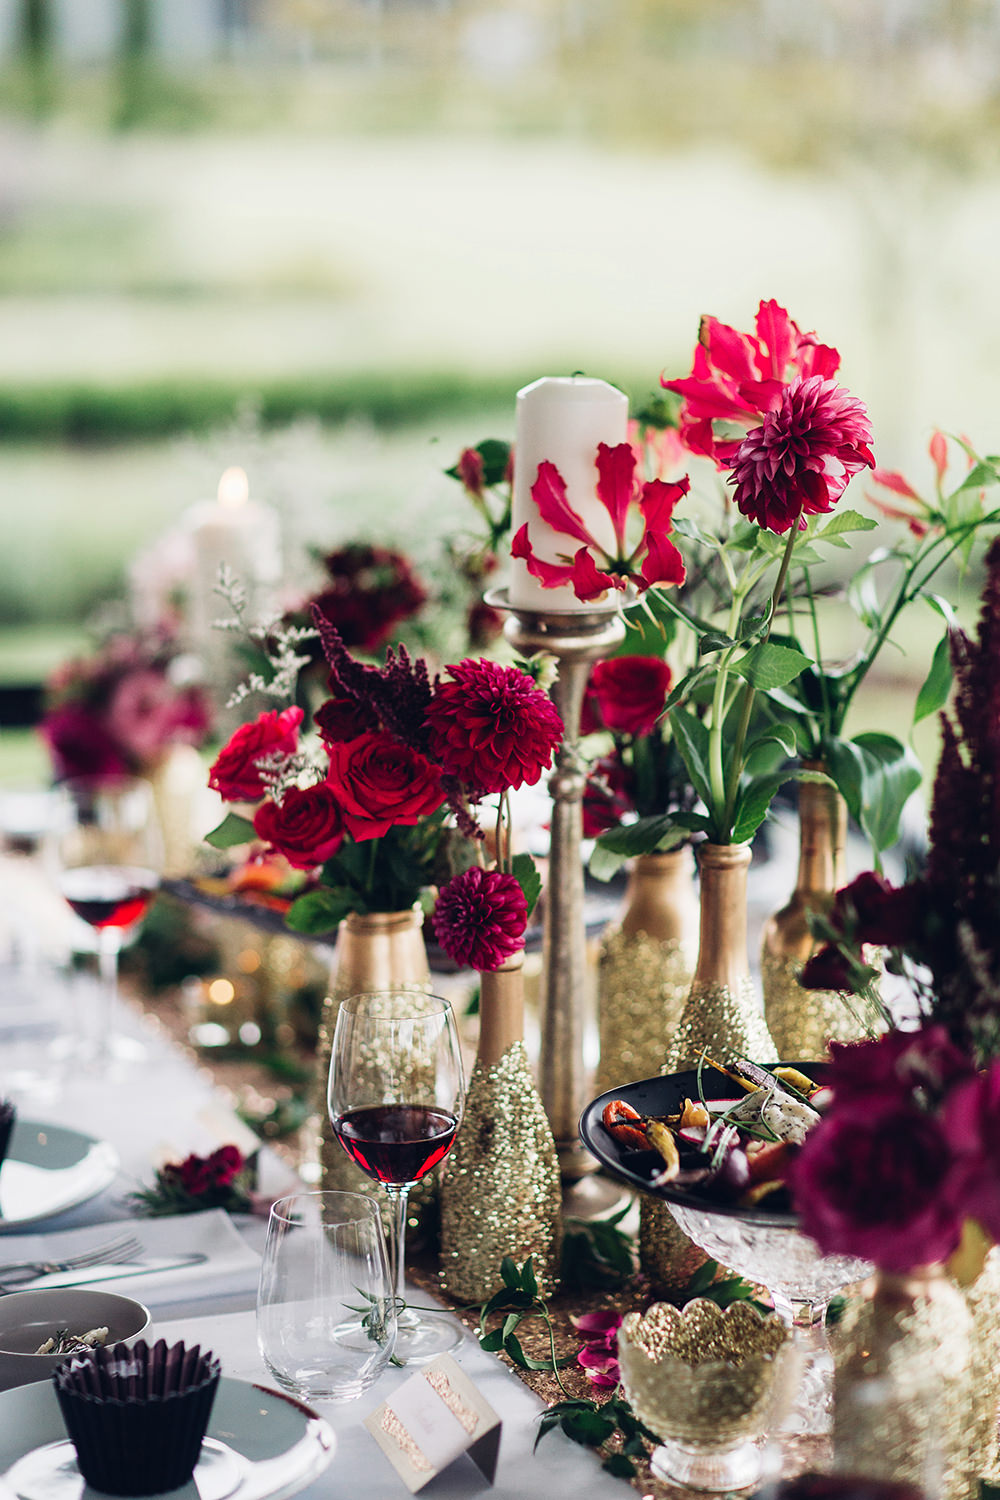 Enjoy the lush gold and red table decor for this shoot